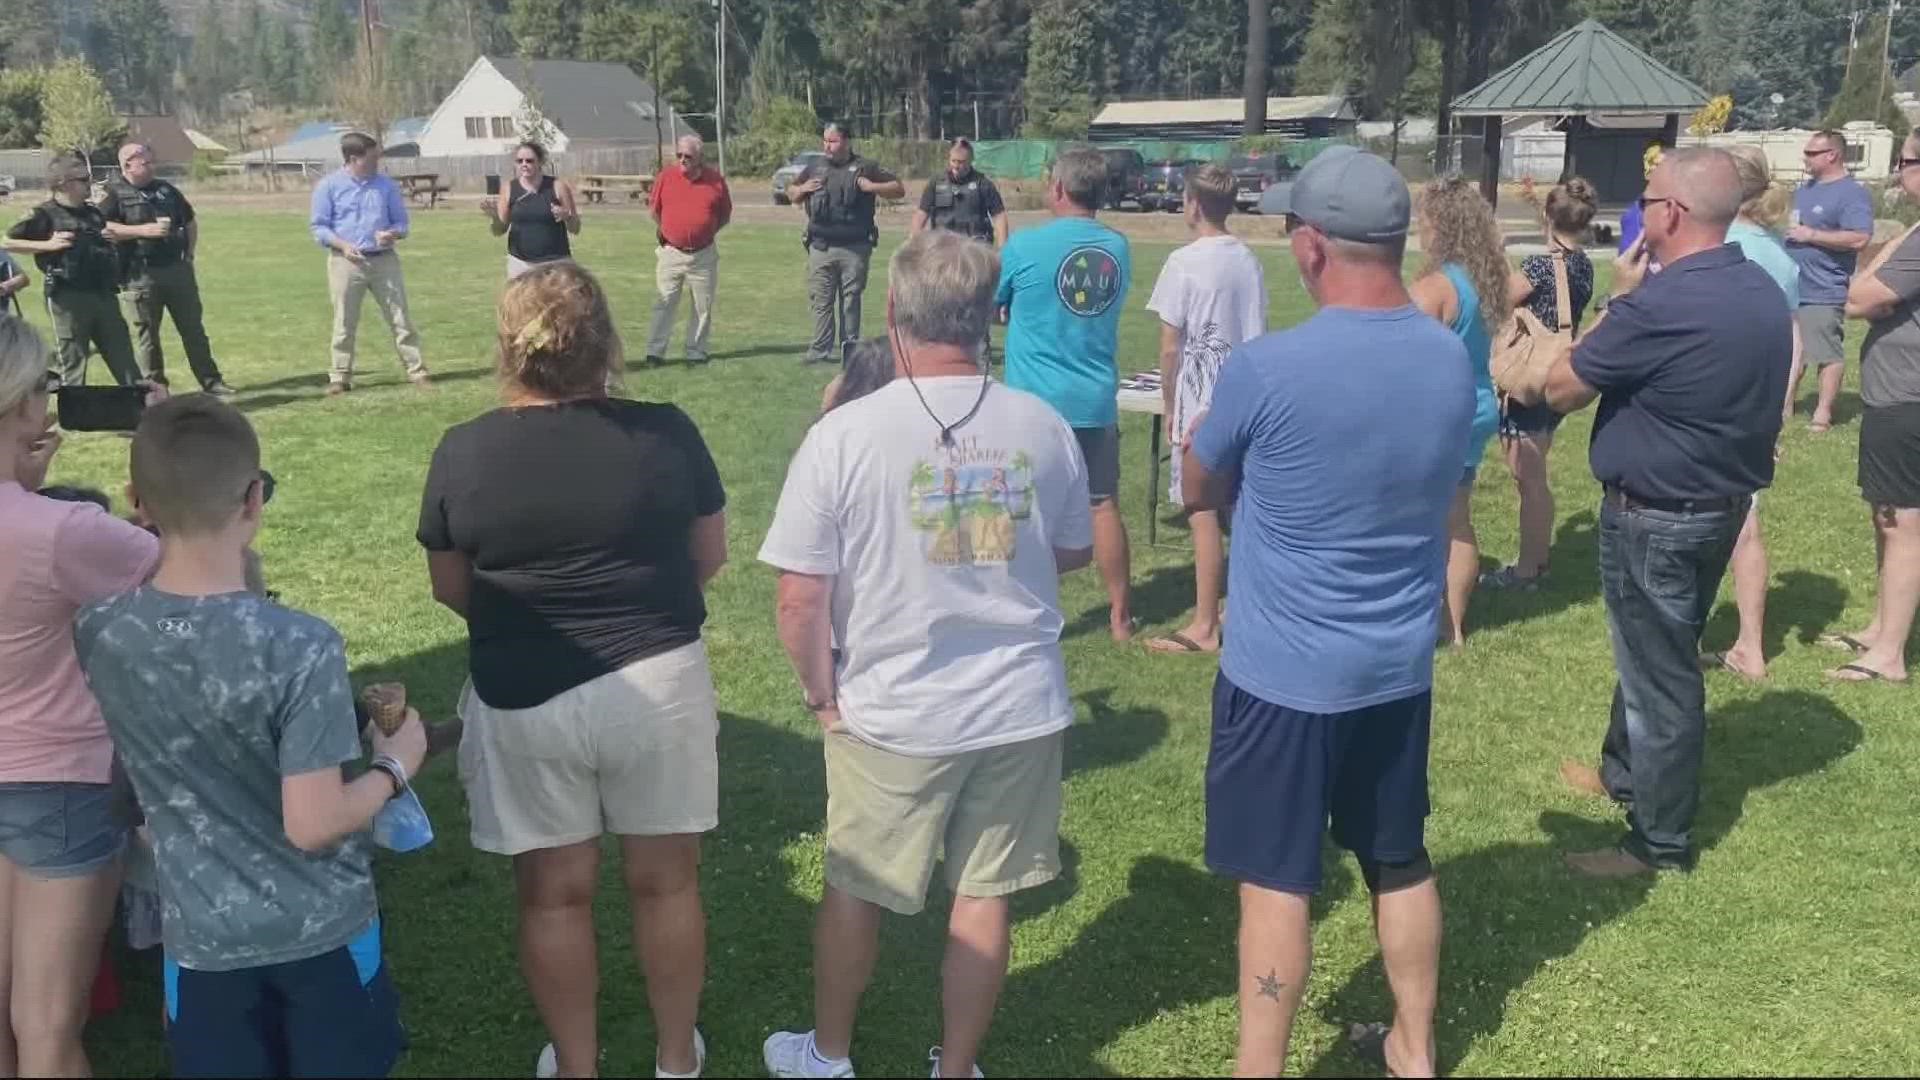 Dozens of people gathered together in the hard-hit Santiam Canyon to mark one year since the devastating wildfires that burned through the area.